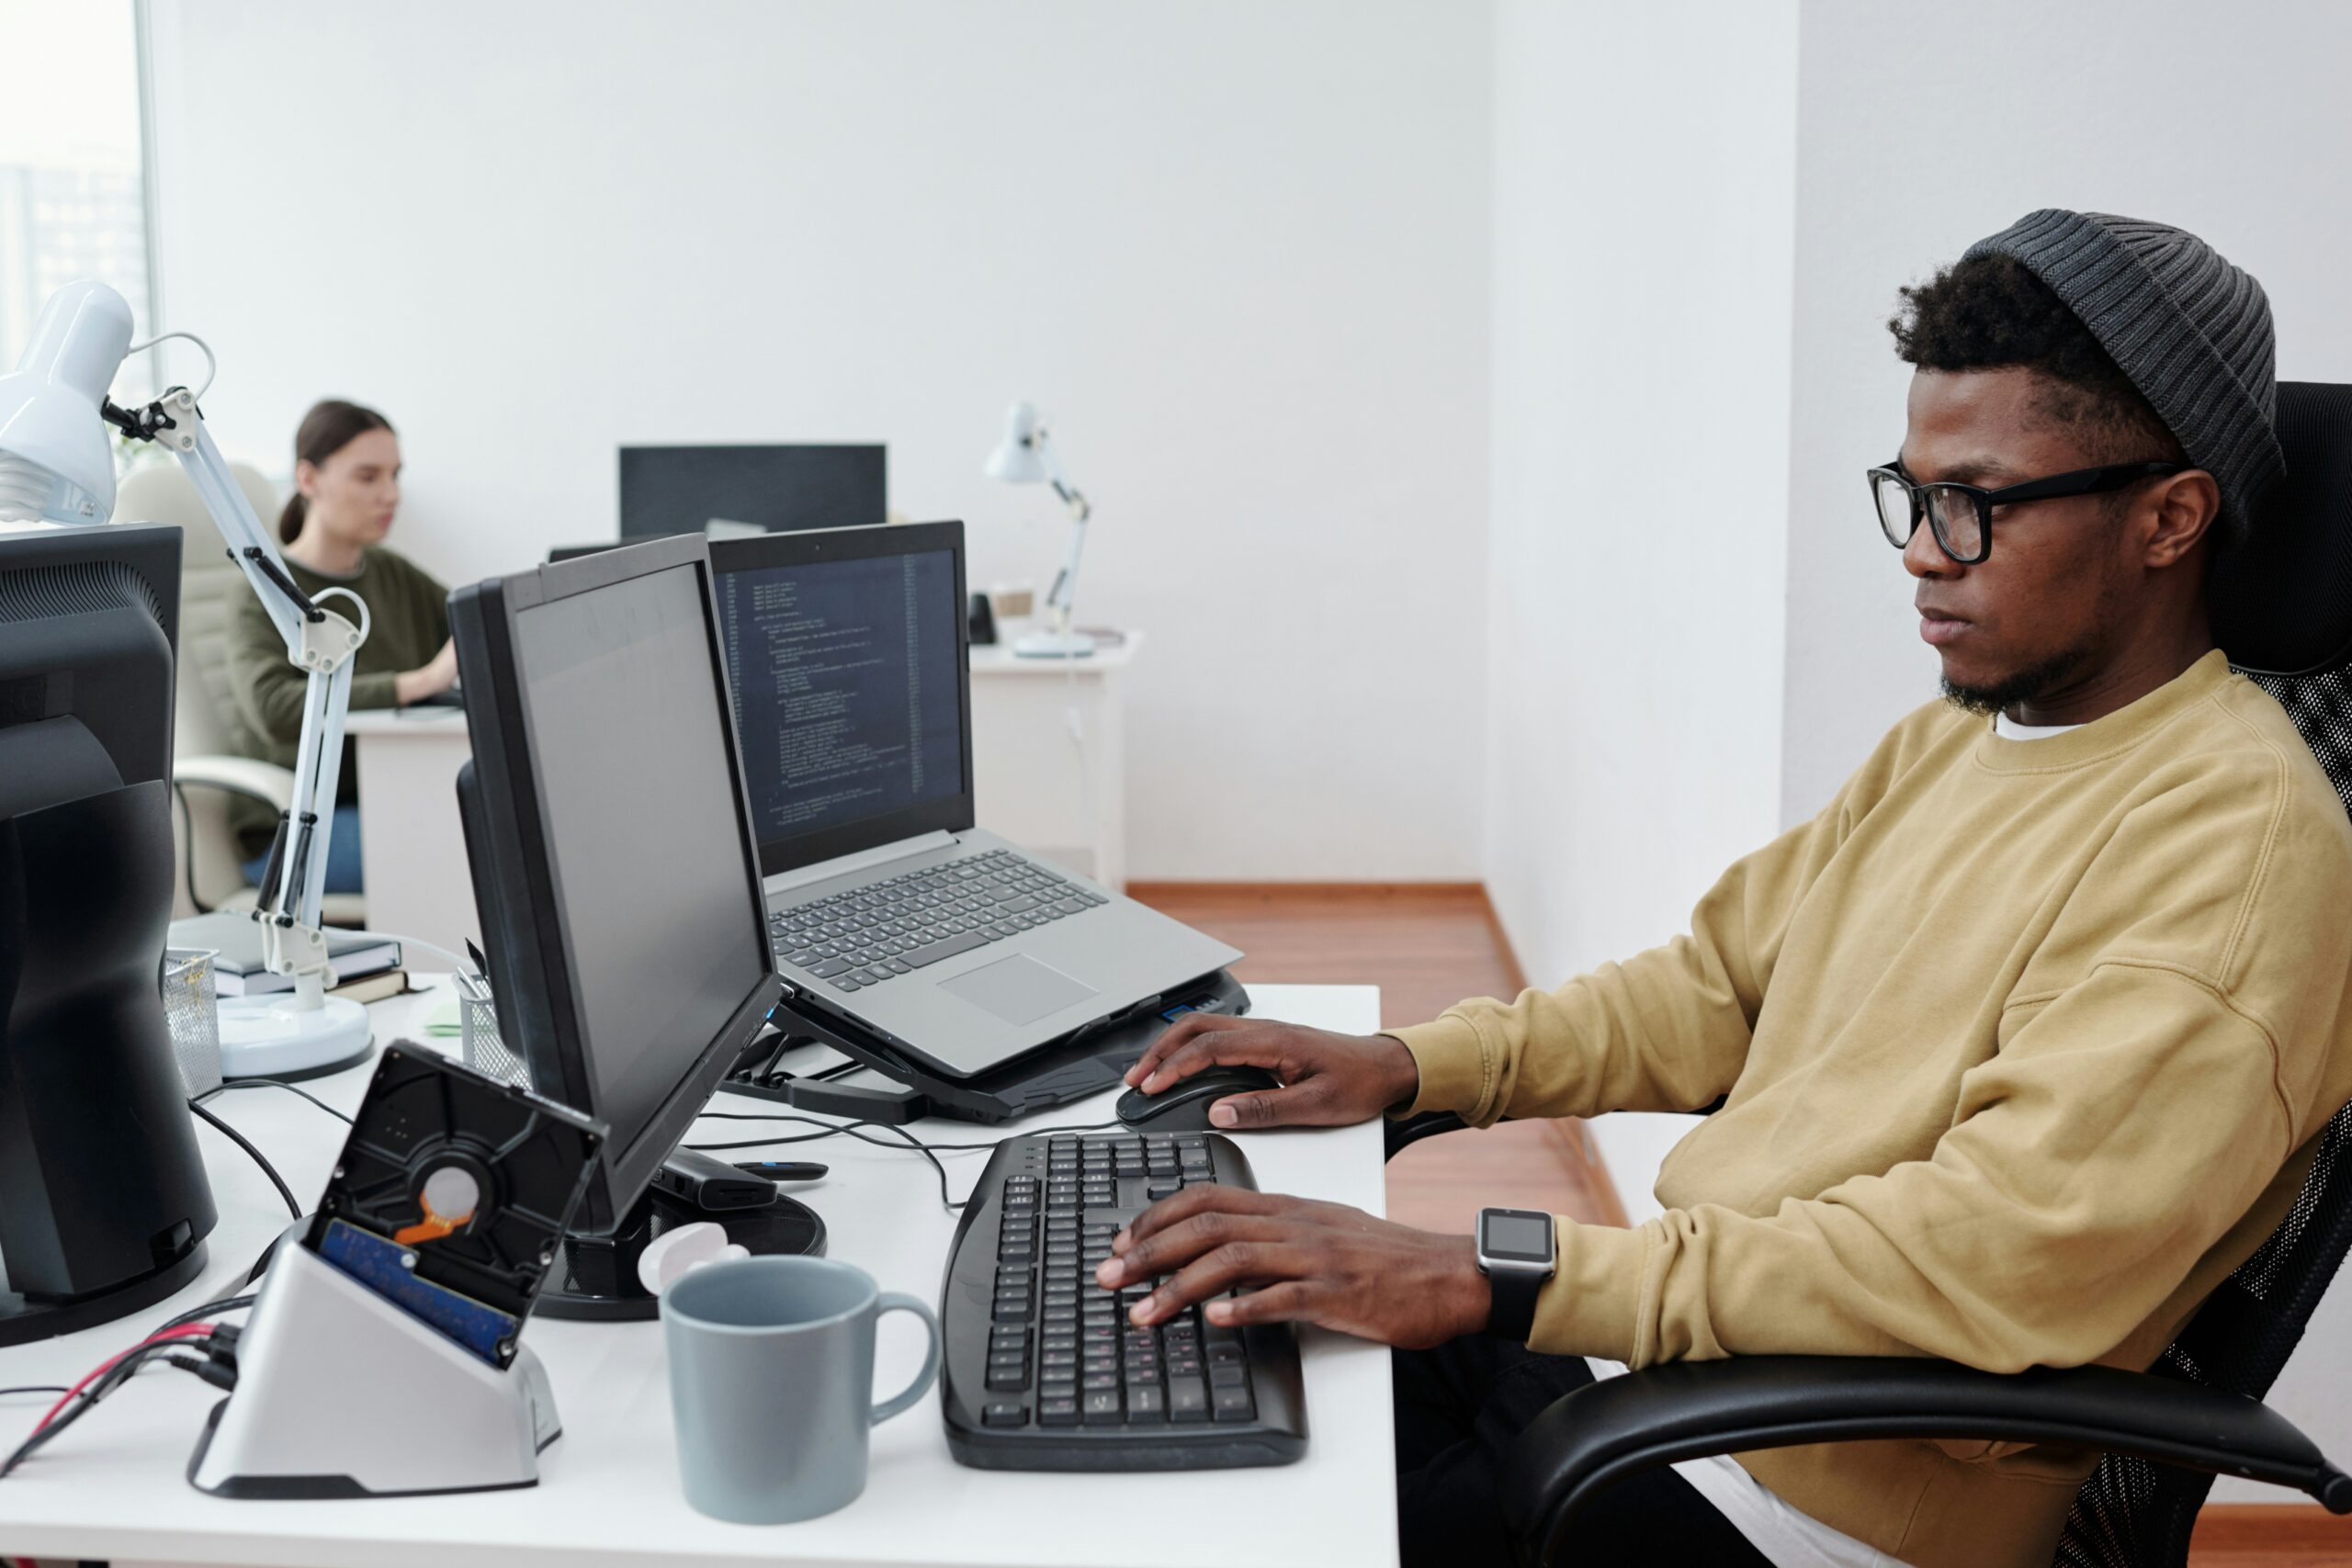 A young man in glasses and a beanie works on IT consulting at a computer in an office.